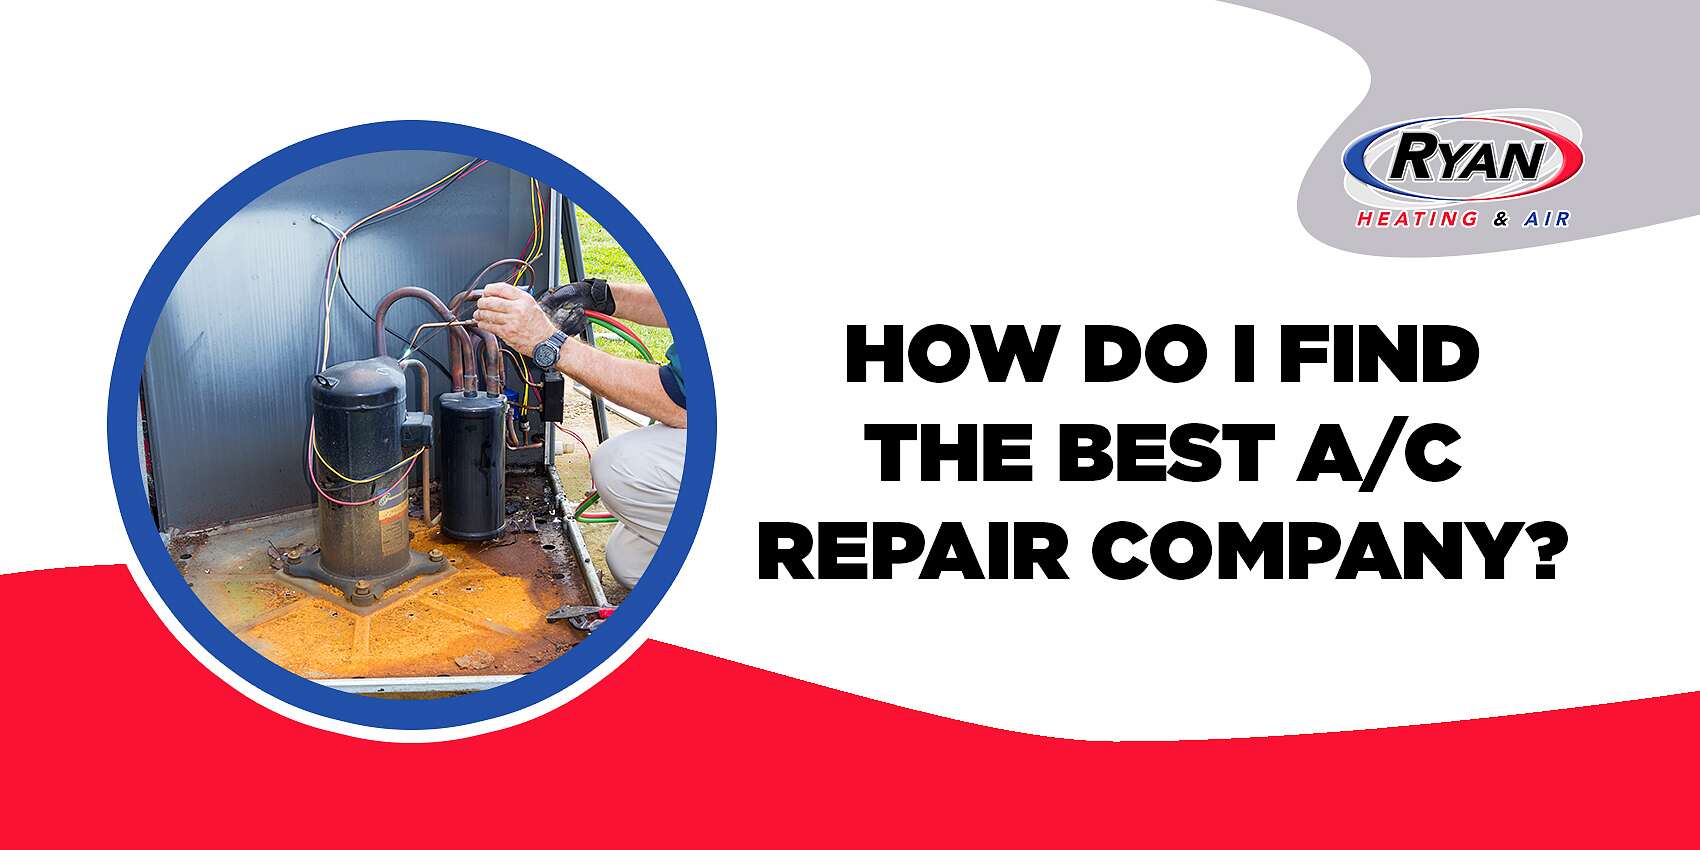 How Do I Find The Best A/C Repair Company?